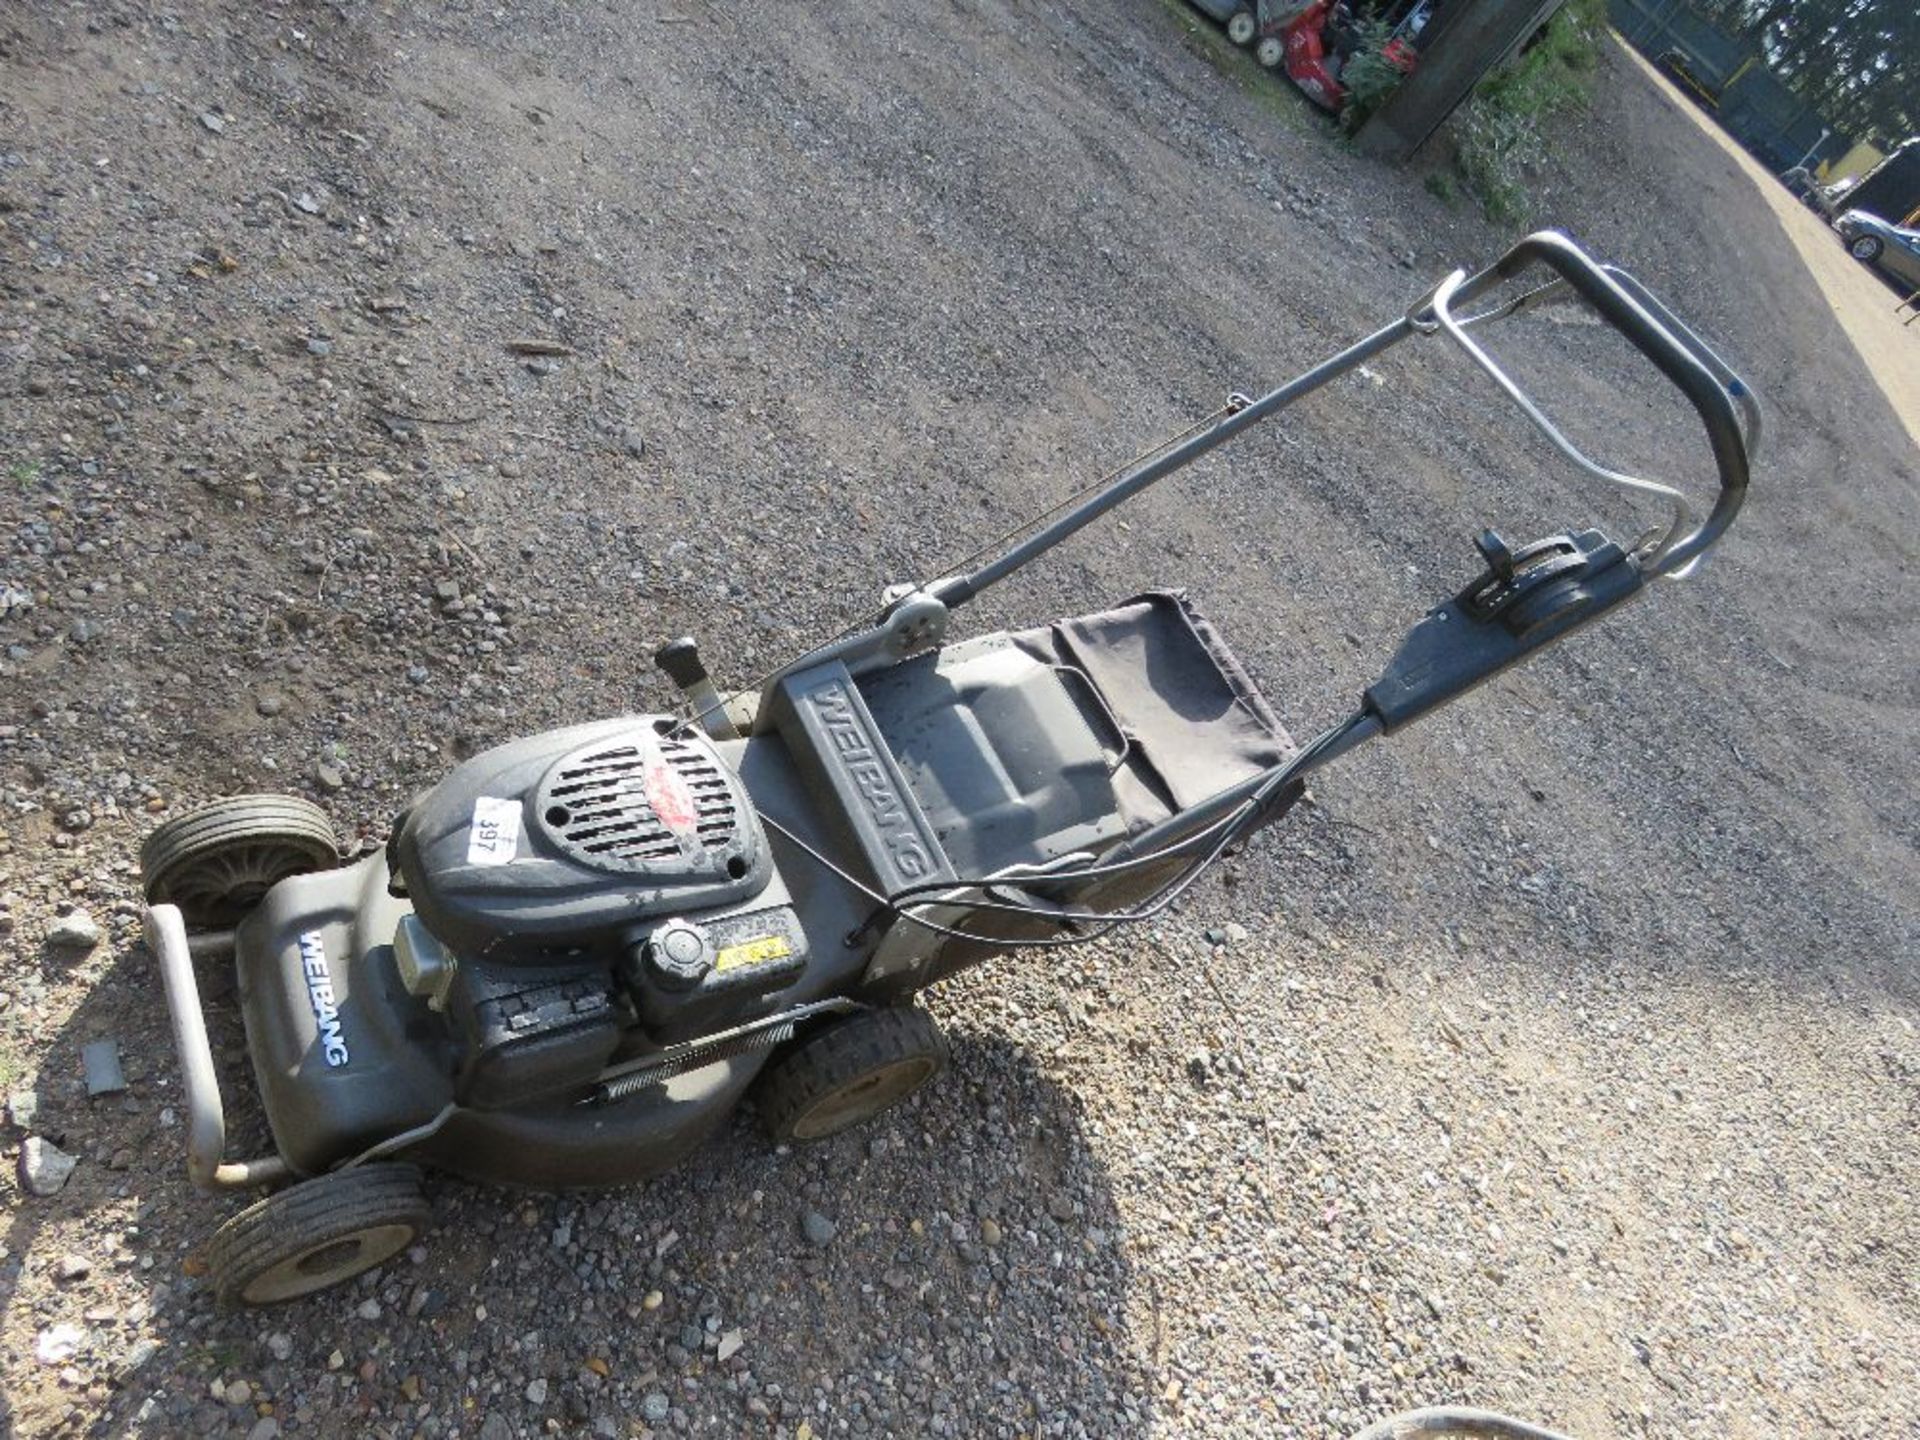 WEIBANG PROFESSIONAL SELF DRIVE LAWNMOWER WITH COLLECTOR, YEAR 2021 APPROX. DIRECT FROM LOCAL LANDSC - Image 2 of 3